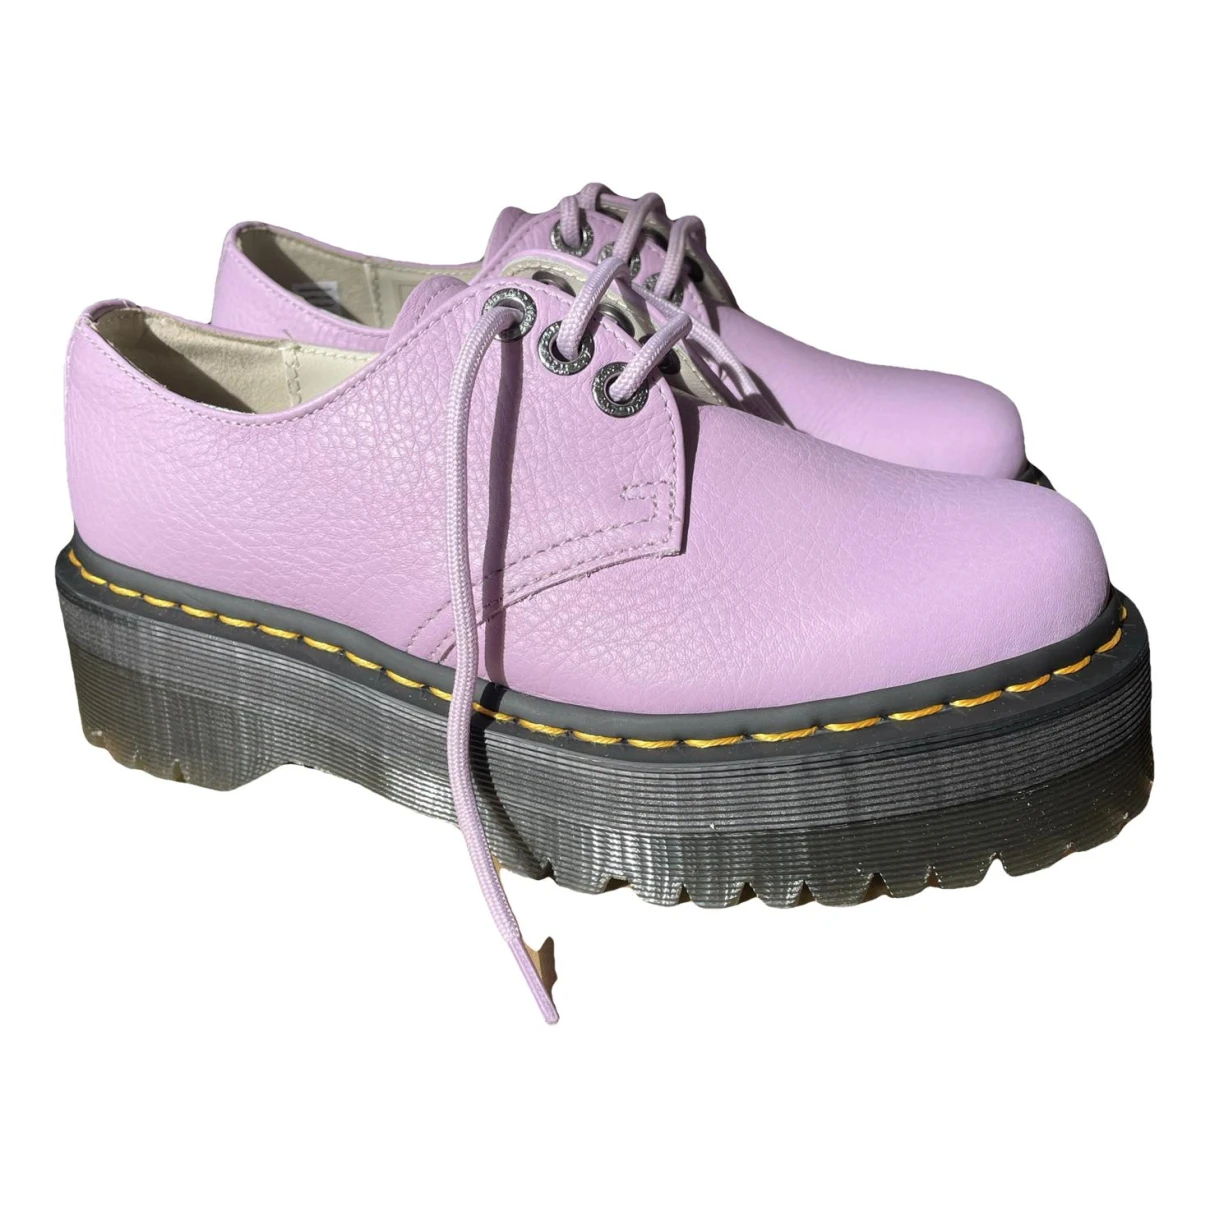 Pre-owned Dr. Martens' 1461 (3 Eye) Leather Lace Ups In Purple